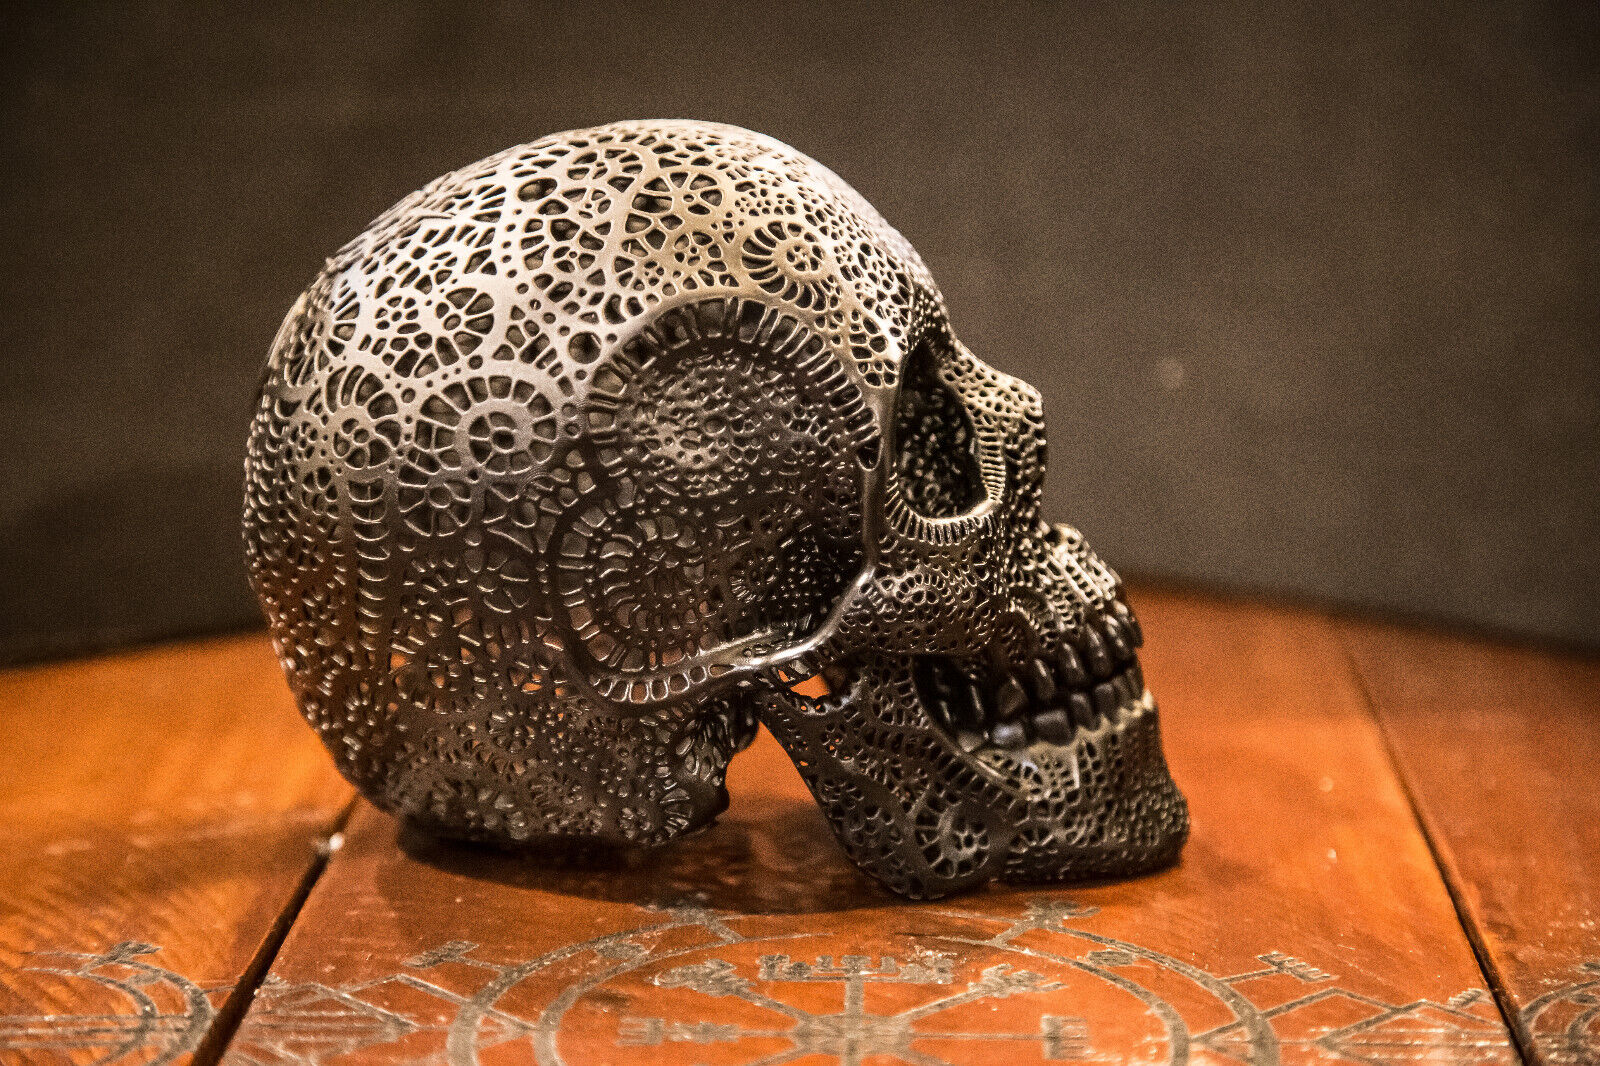 filigree Human Skull - Large high quality piece - FREE world wide shipping.